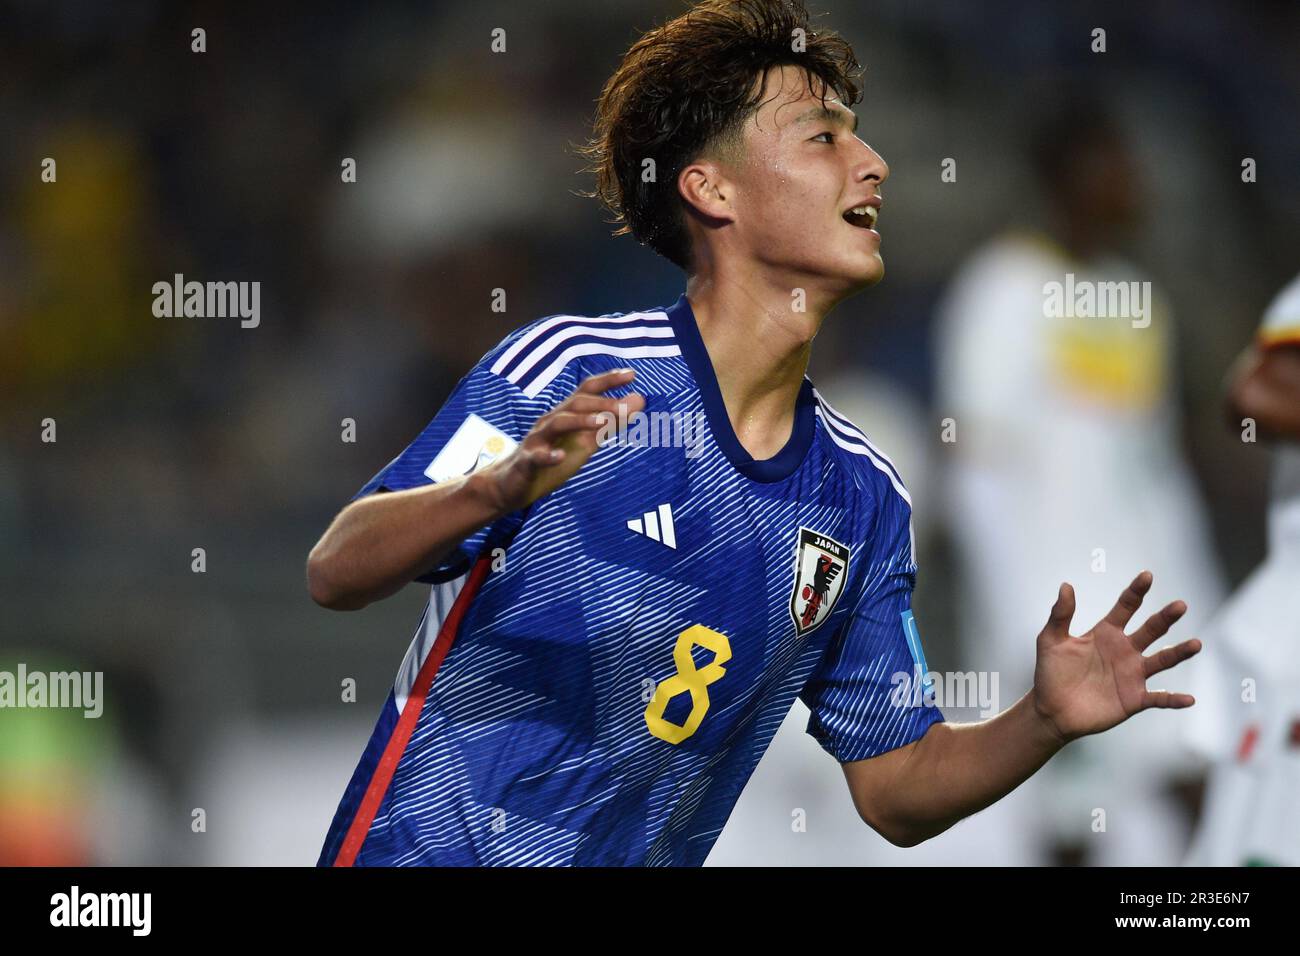 Japan's Kodai Sano reacts after missing an opportunity to score during a FIFA U-20 World Cup group C soccer match against Senegal at the Diego Maradona stadium in La Plata, Argentina, Sunday, May 21, 2023. (AP Photo/Gustavo Garello) Stock Photo